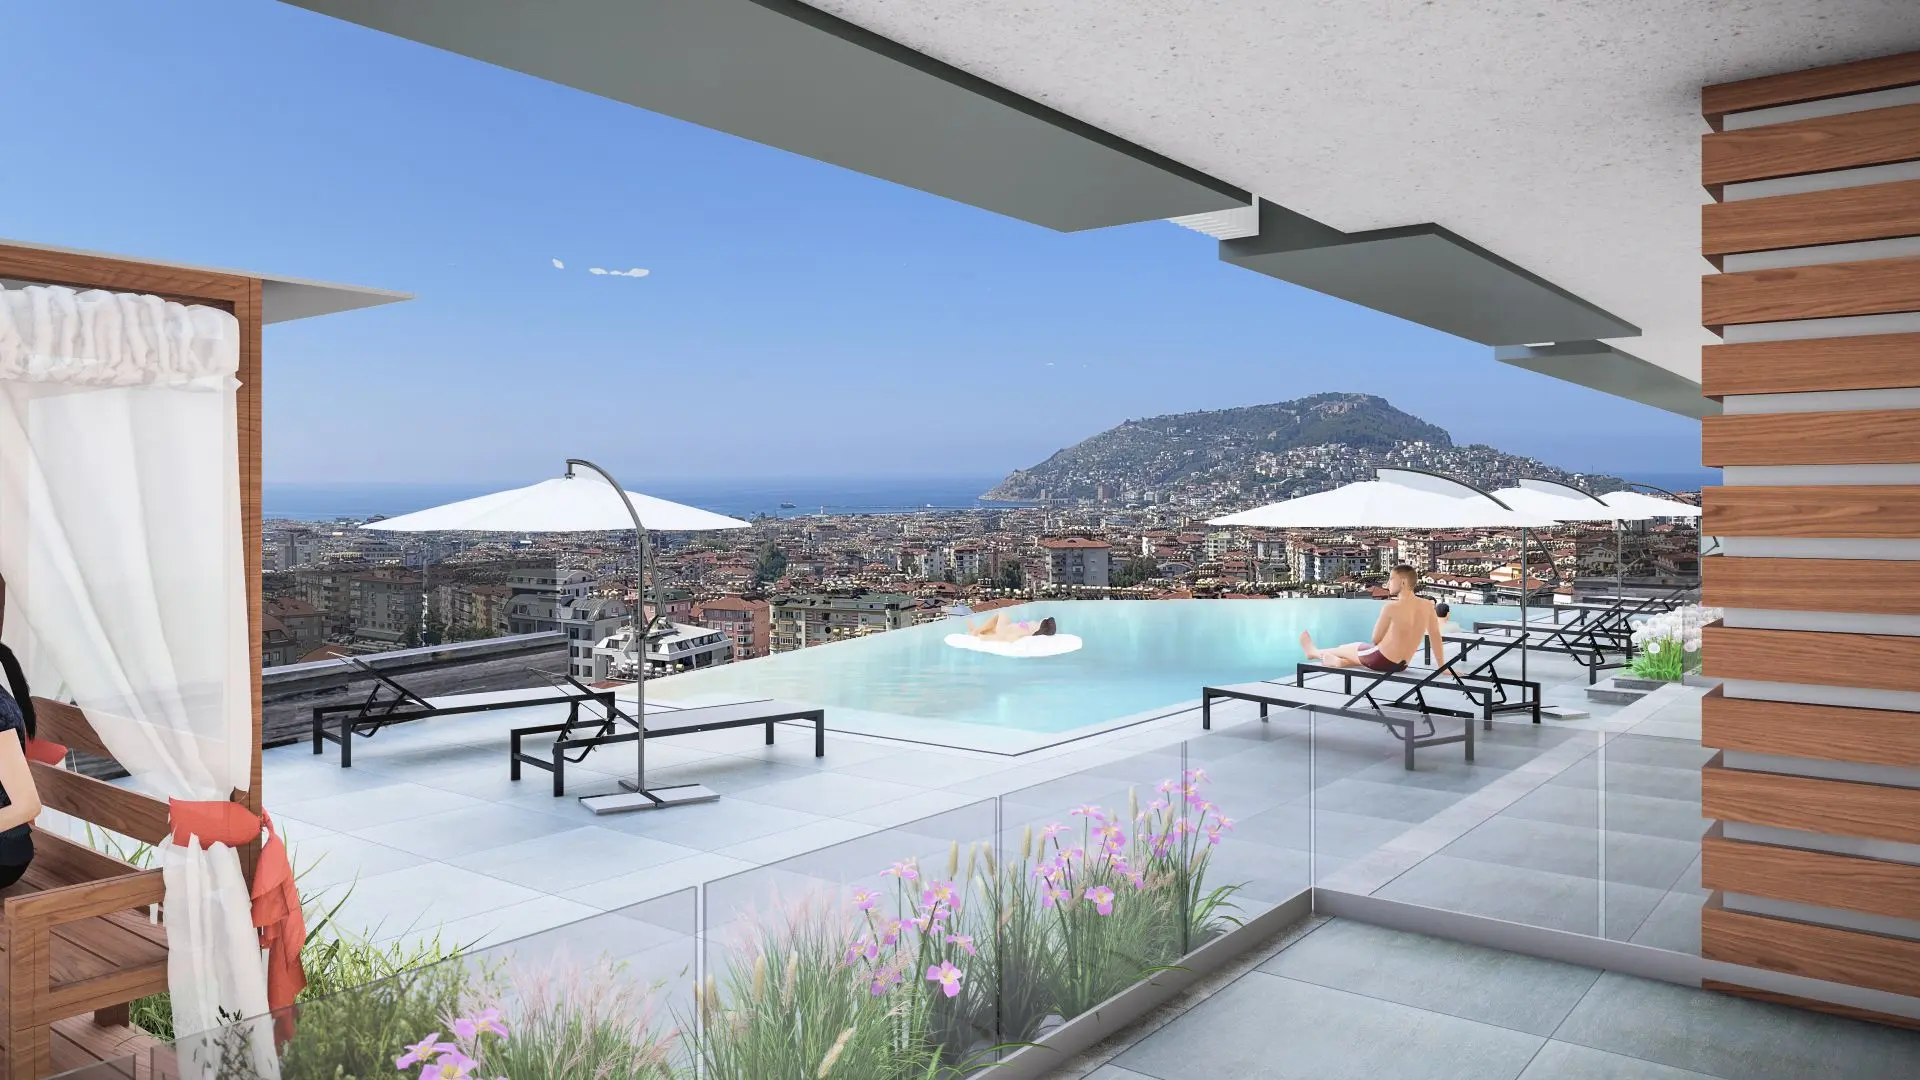 NEW PROJECT IN ALANYA - STUNNING CASTLE VIEW